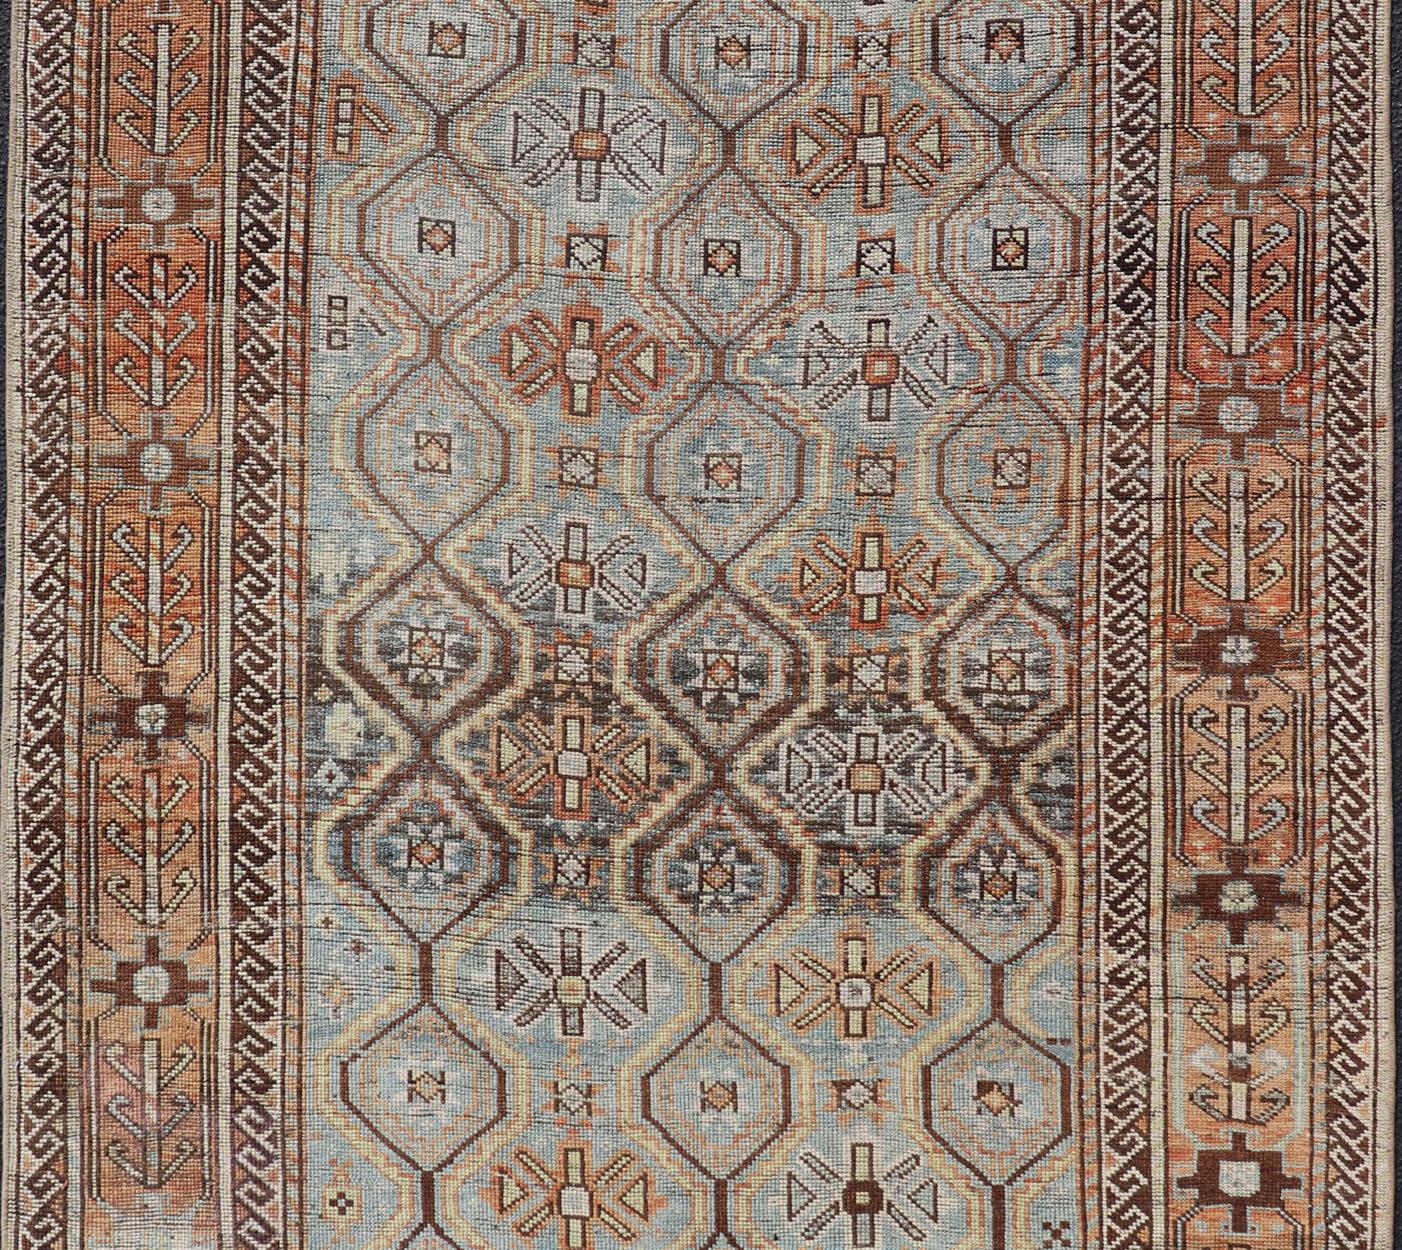 Hand-Knotted Ice Blue and Coper Color Antique Persian Kurdish Rug with All-Over Tribal